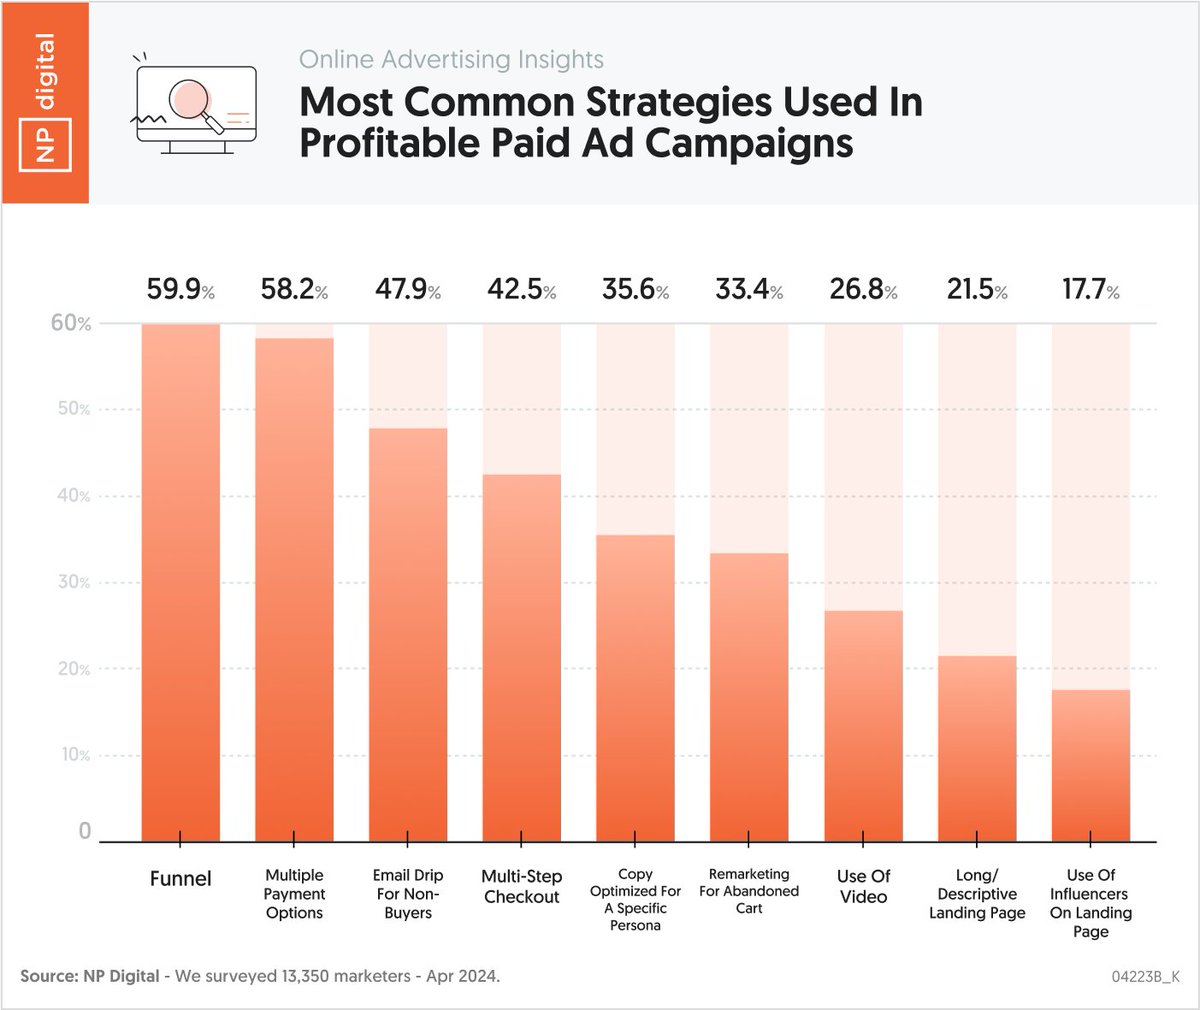 You’re wasting your time on paid ads. I get it, Google generates 237 billion a year, and Meta generates 131 billion a year. So, it must work if they generate that much revenue, right? Well, check what 13,350 marketers say about paid ads. Only 21.8% of marketers were able to…